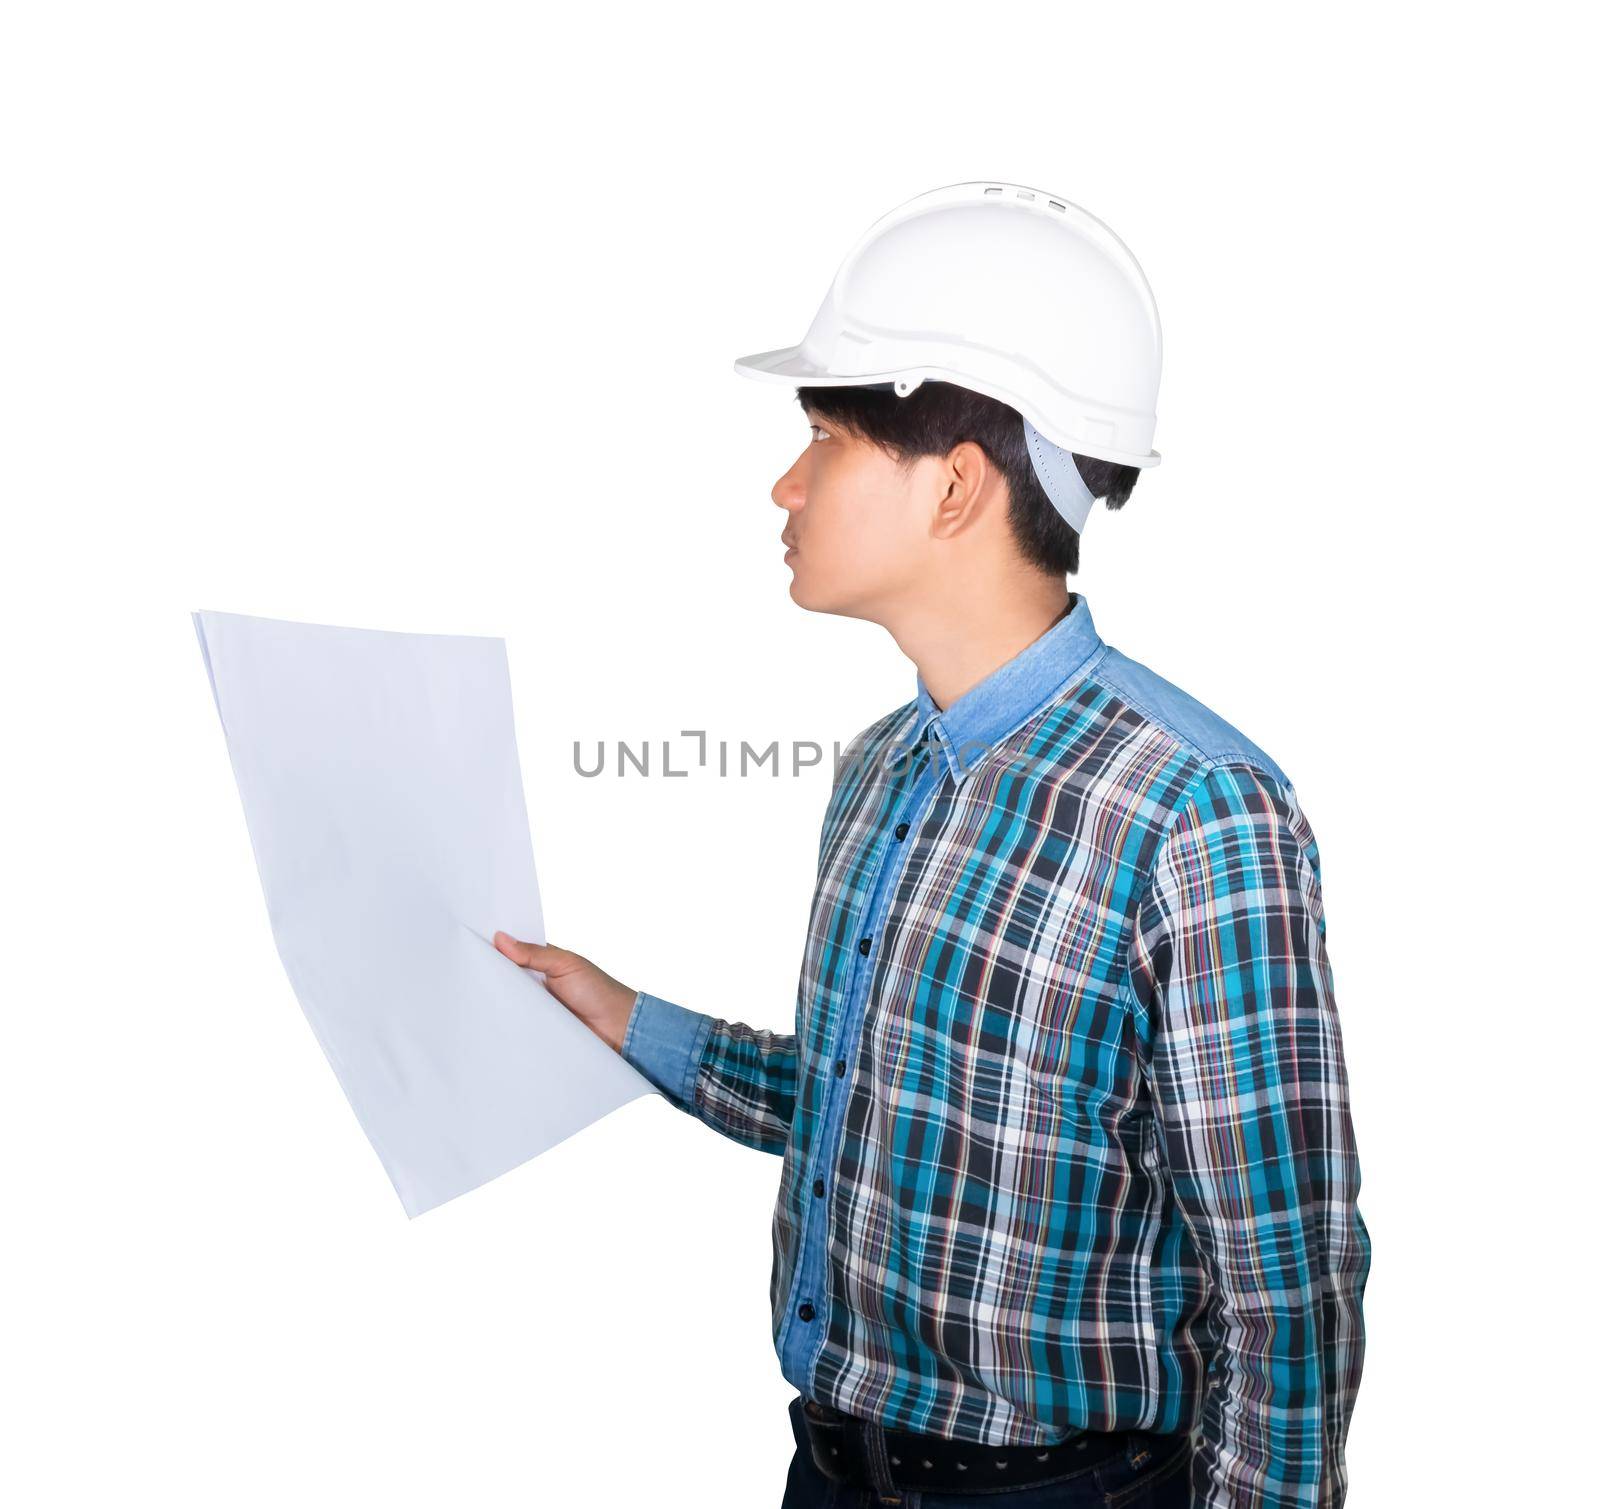 Engineer holding rolled blueprints inspect construction and wear white safety helmet plastic on white background by pramot